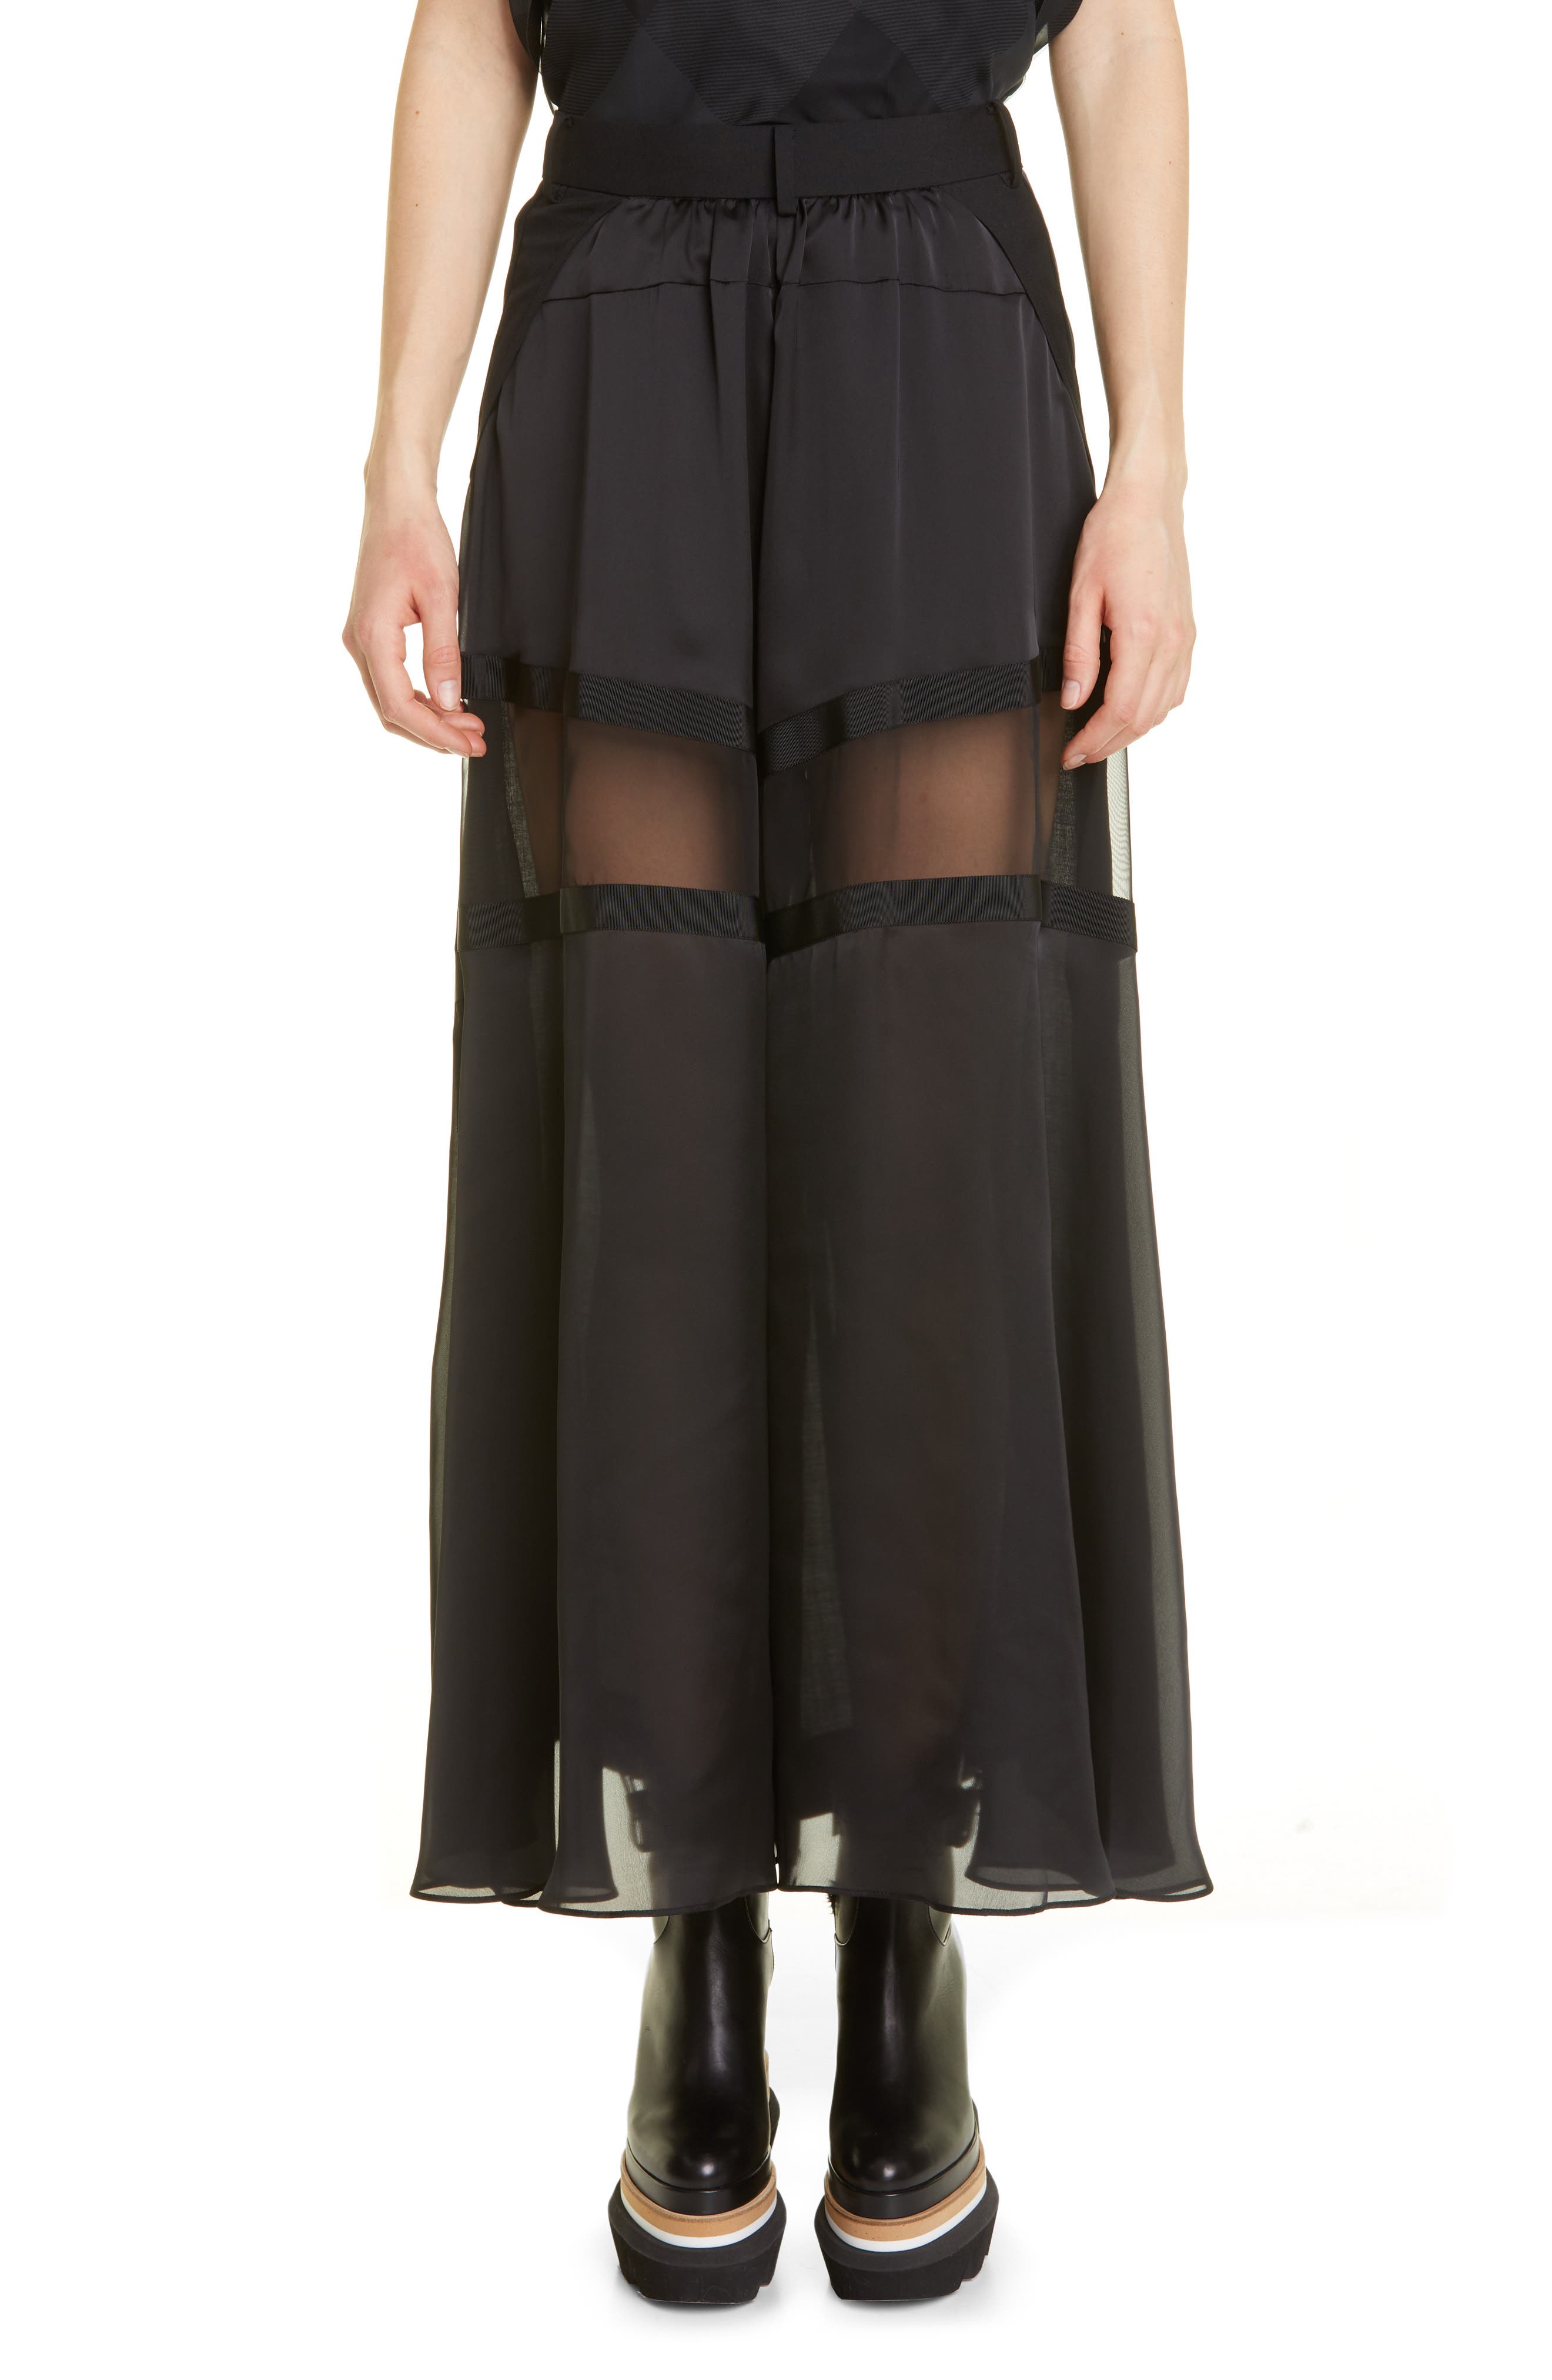 Sacai Mixed Suiting Wide Leg Pants in Black at Nordstrom, Size 1